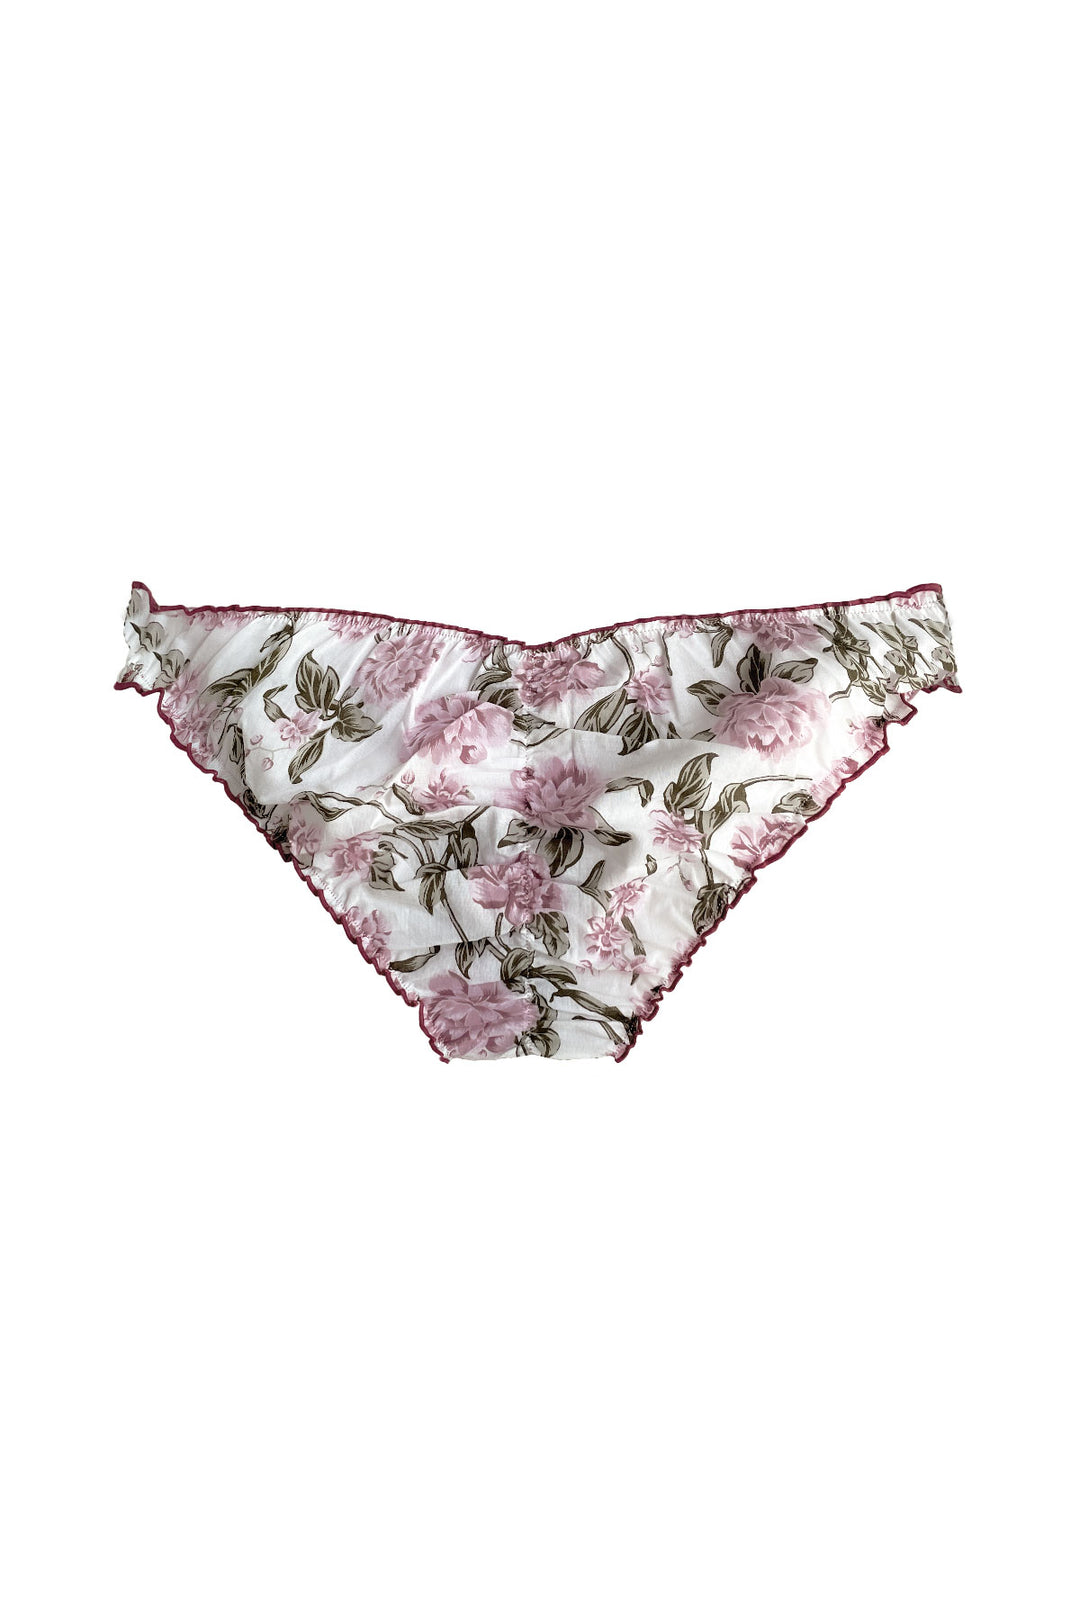 back view of floral printed underwear, eco lingerie